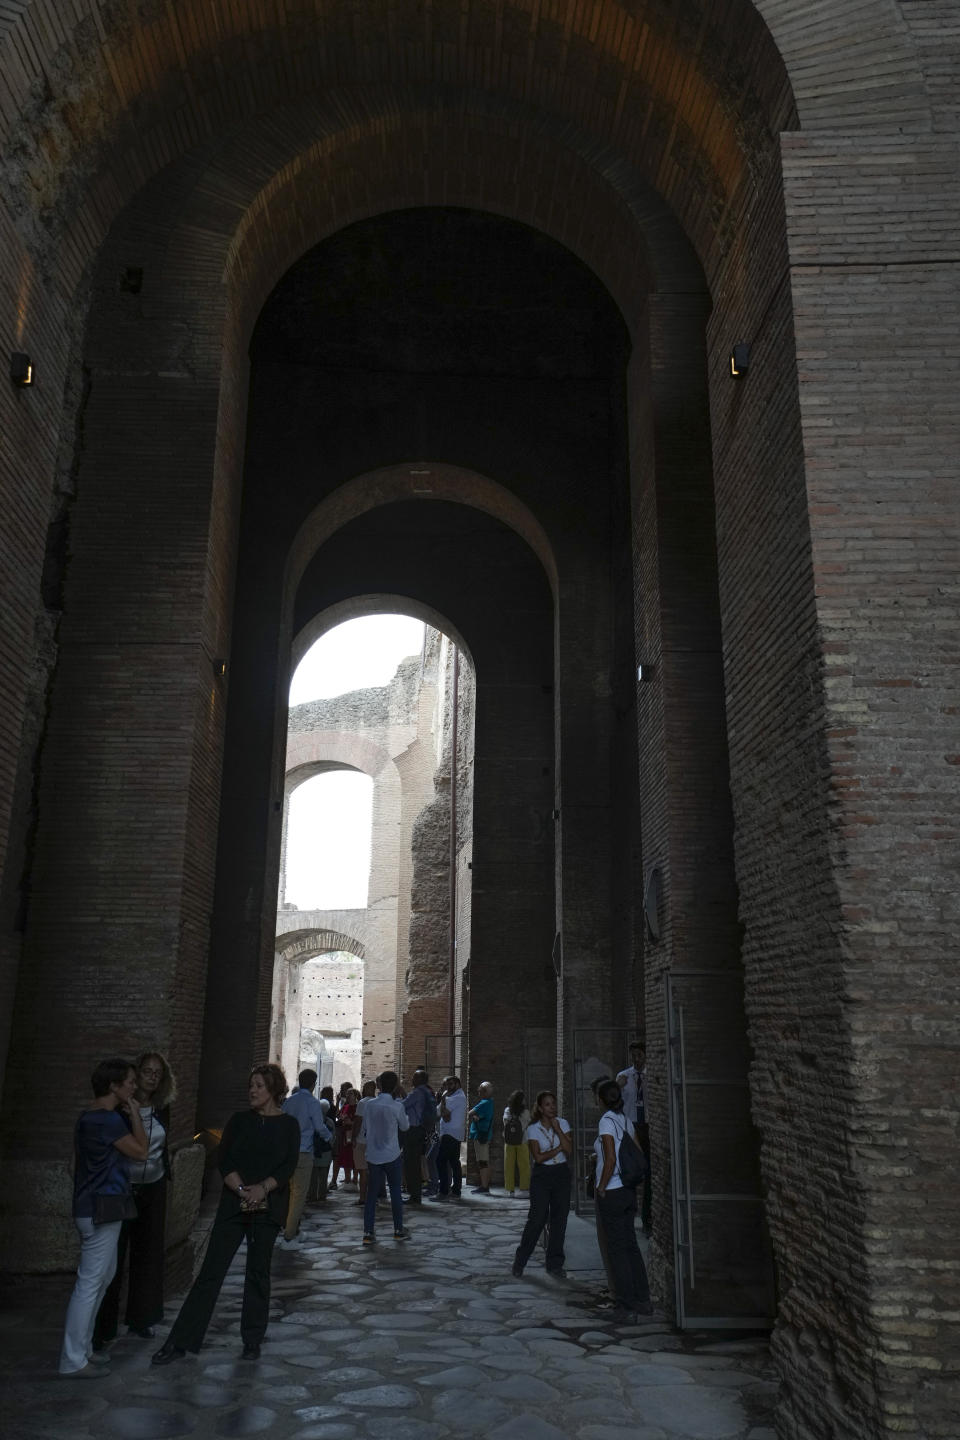 Visitors admire the newly restored domus Tiberiana, one of the main imperial palaces, during the press preview on Rome's Palatine Hill, in Rome, Italy, Wednesday, Sept. 20, 2023. The Domus Tiberiana will reopen to the public on Sept. 21. (AP Photo/Gregorio Borgia)